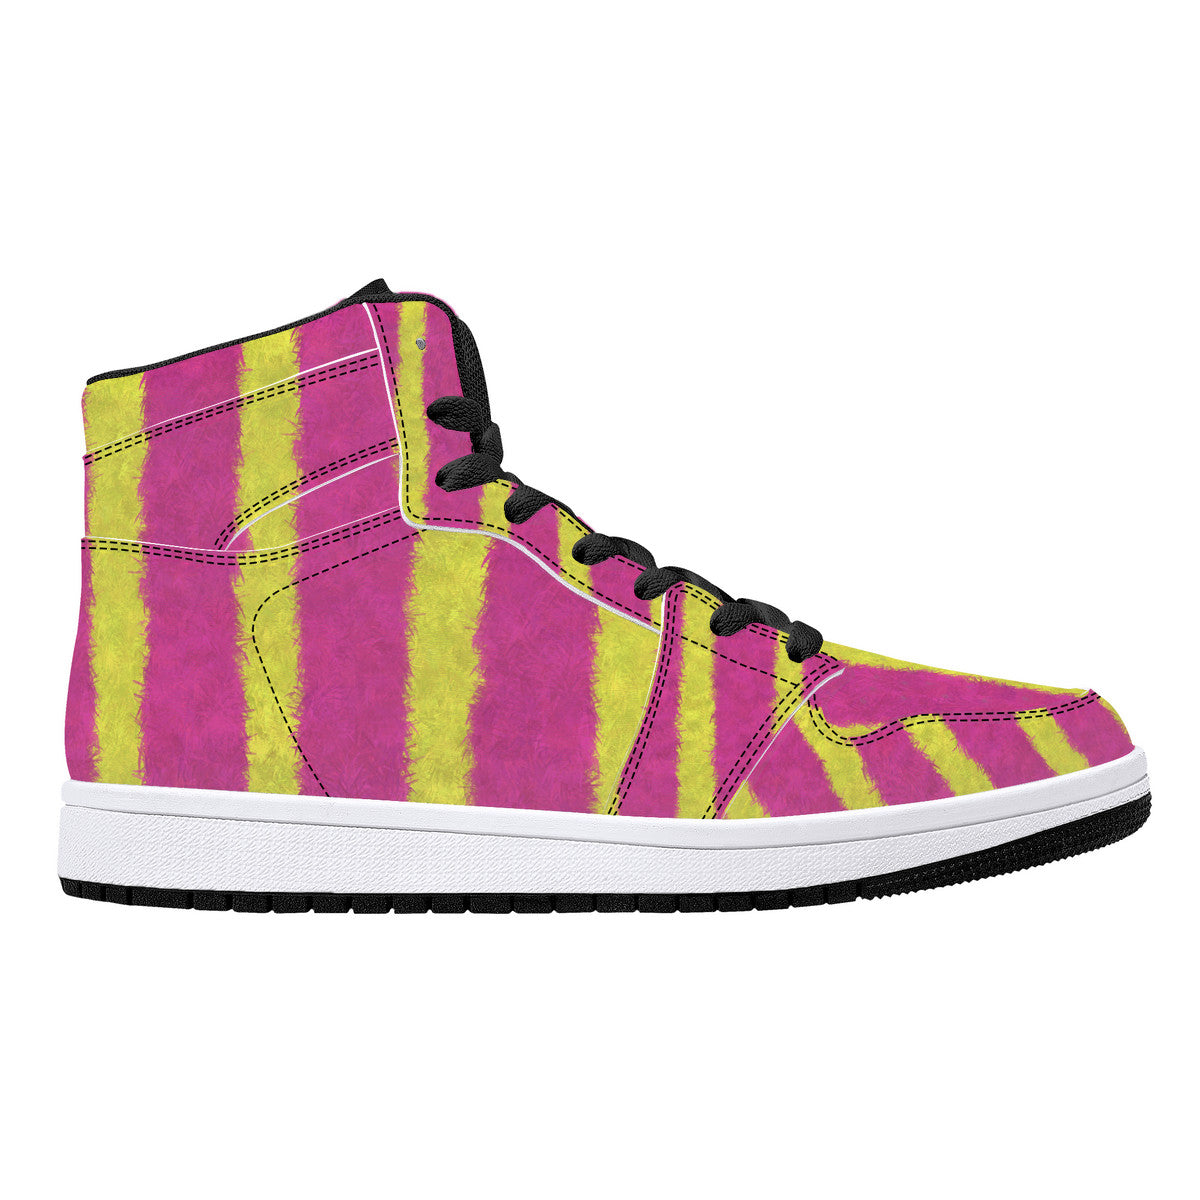 "Plume" High-Top Synthetic Leather Sneakers